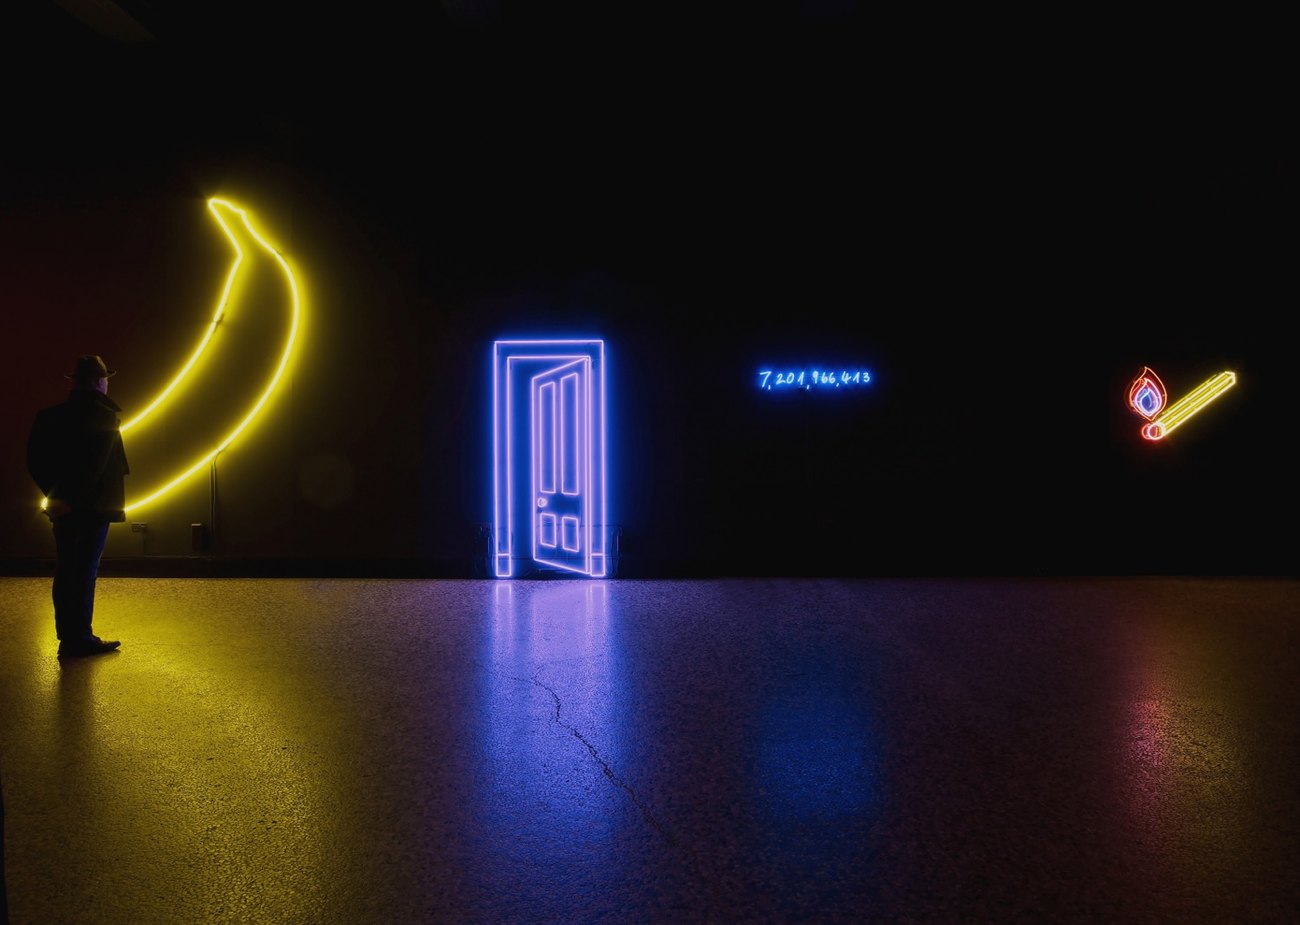 Yellow neon banana, purple neon door, blue neon numbers, yellow and red neon lighted match stick, all on black backdrop